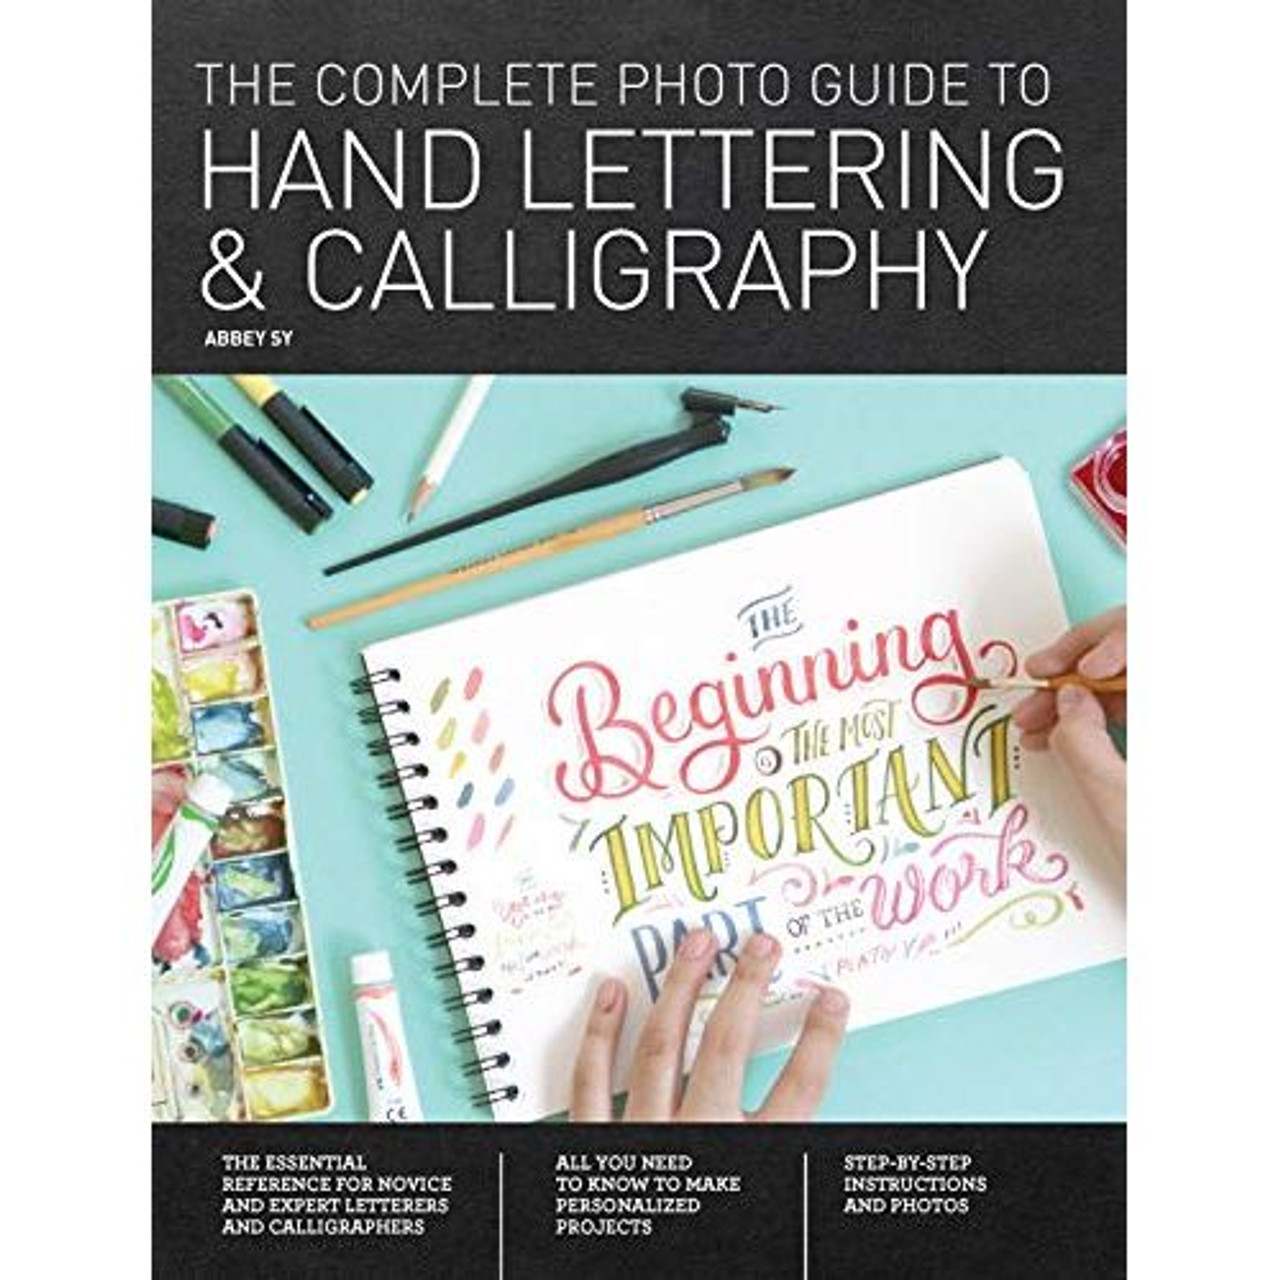 Hand Lettering for Beginners: Step-by-Step Guide to Get Started